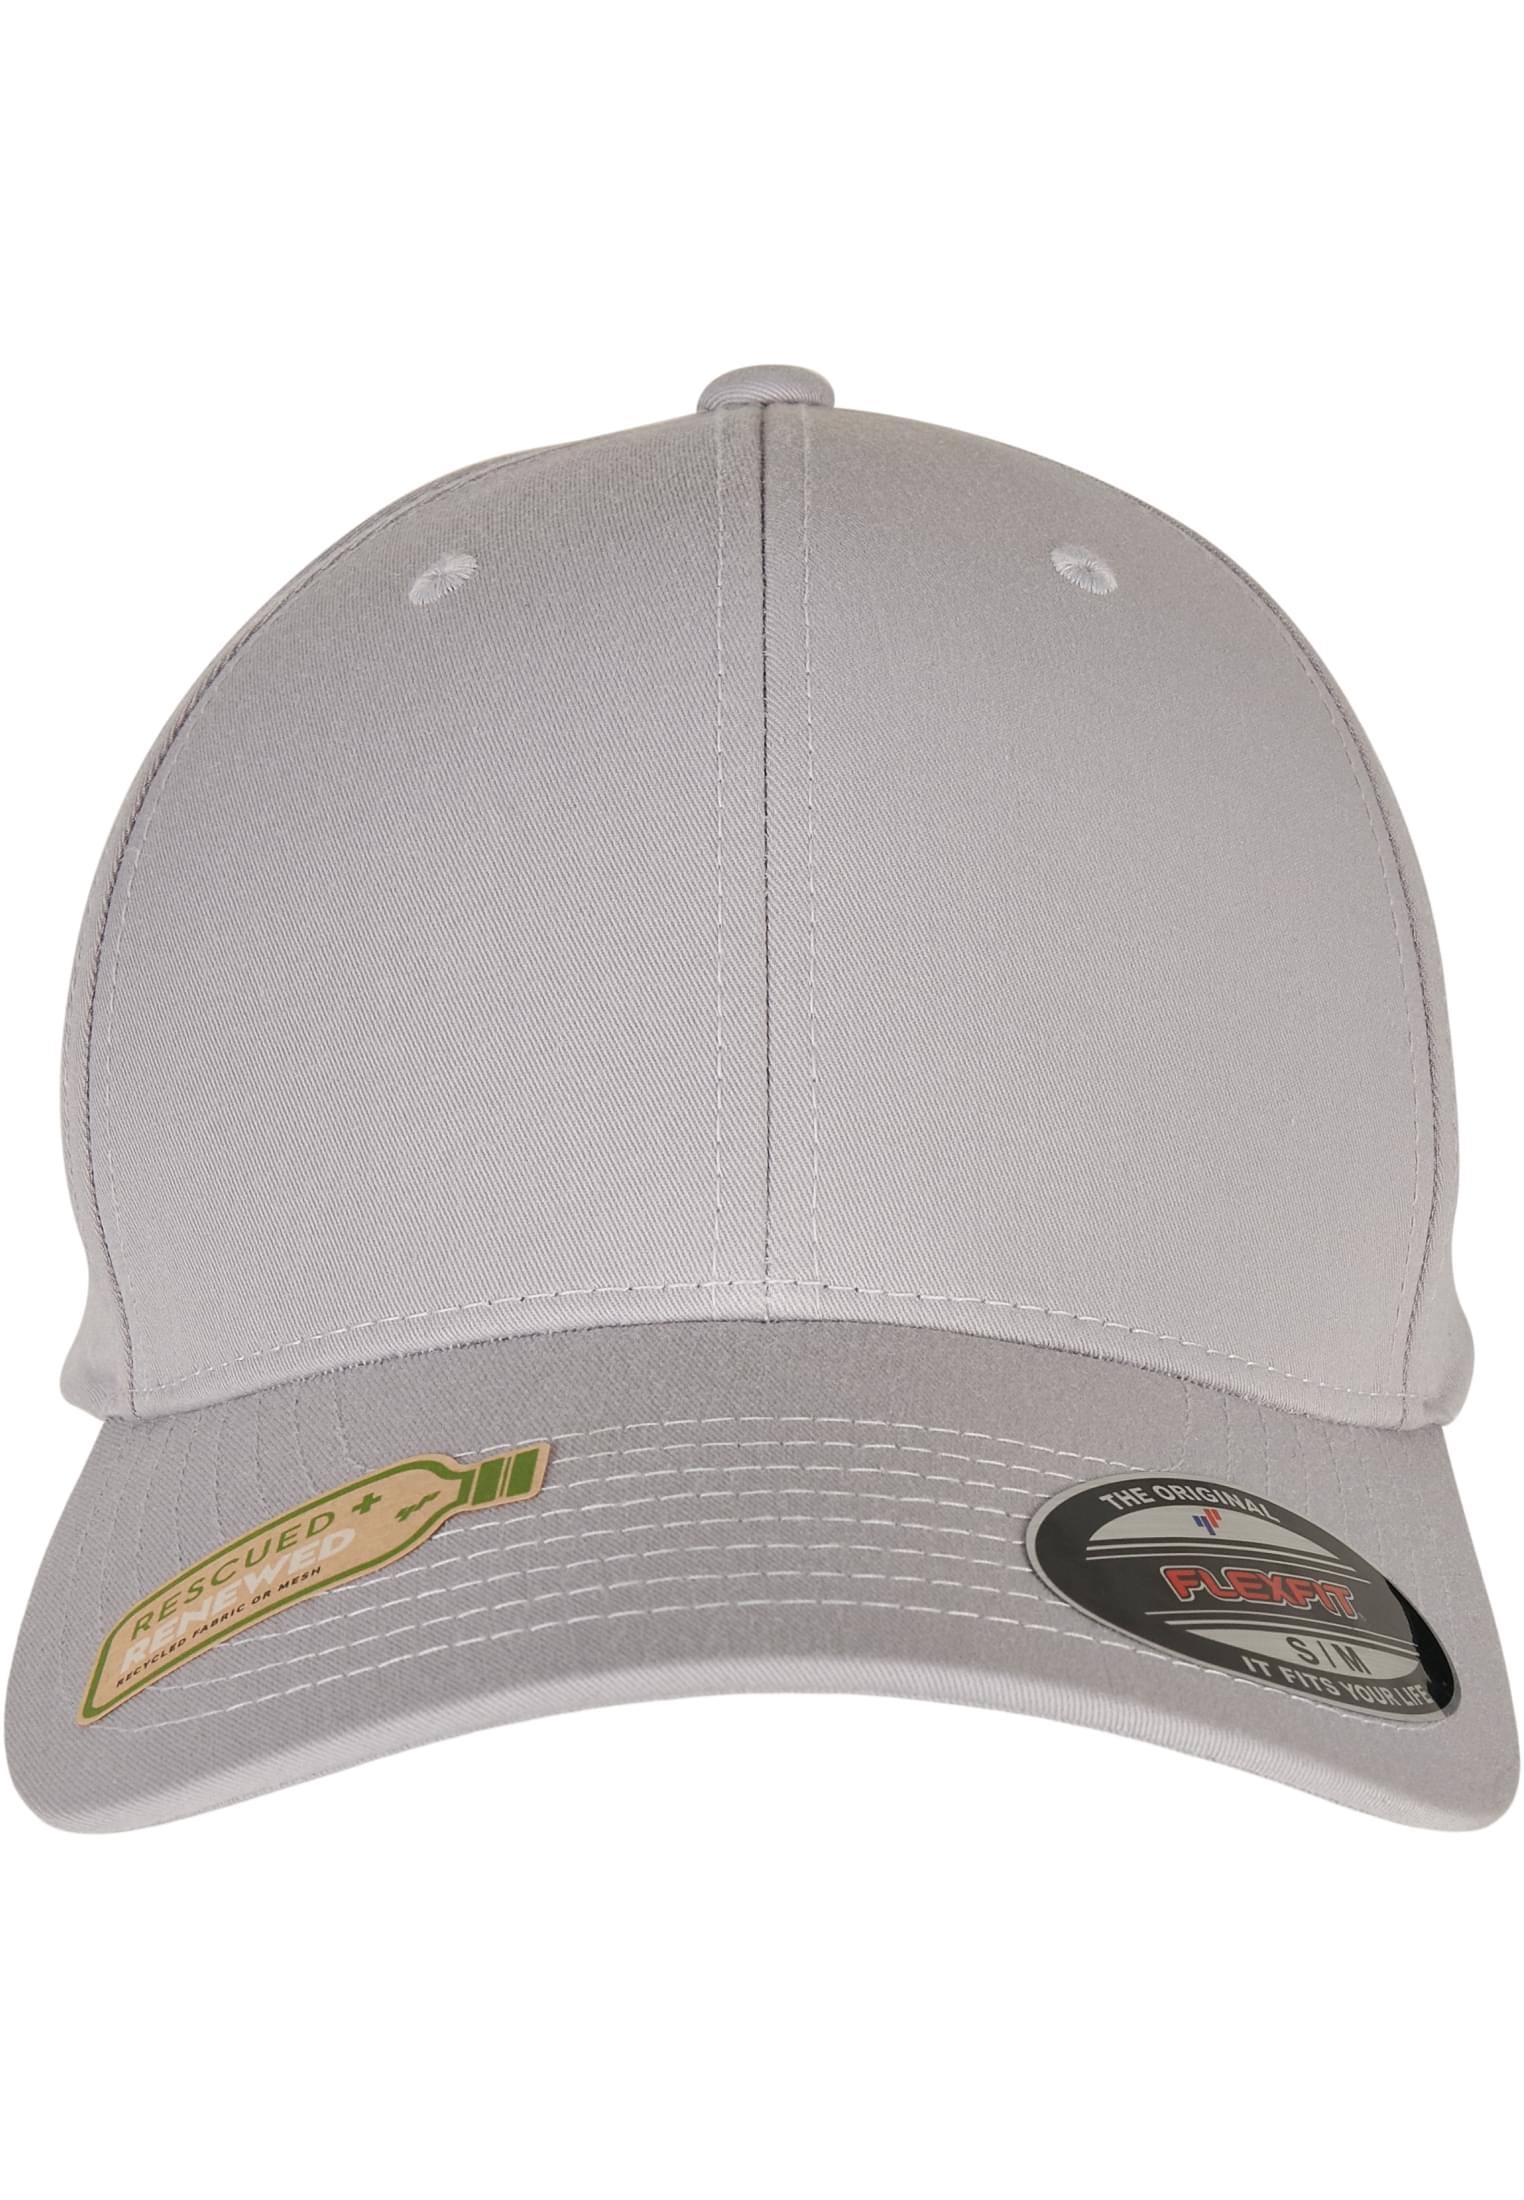 Cap-6277RP Polyester Recycled Flexfit